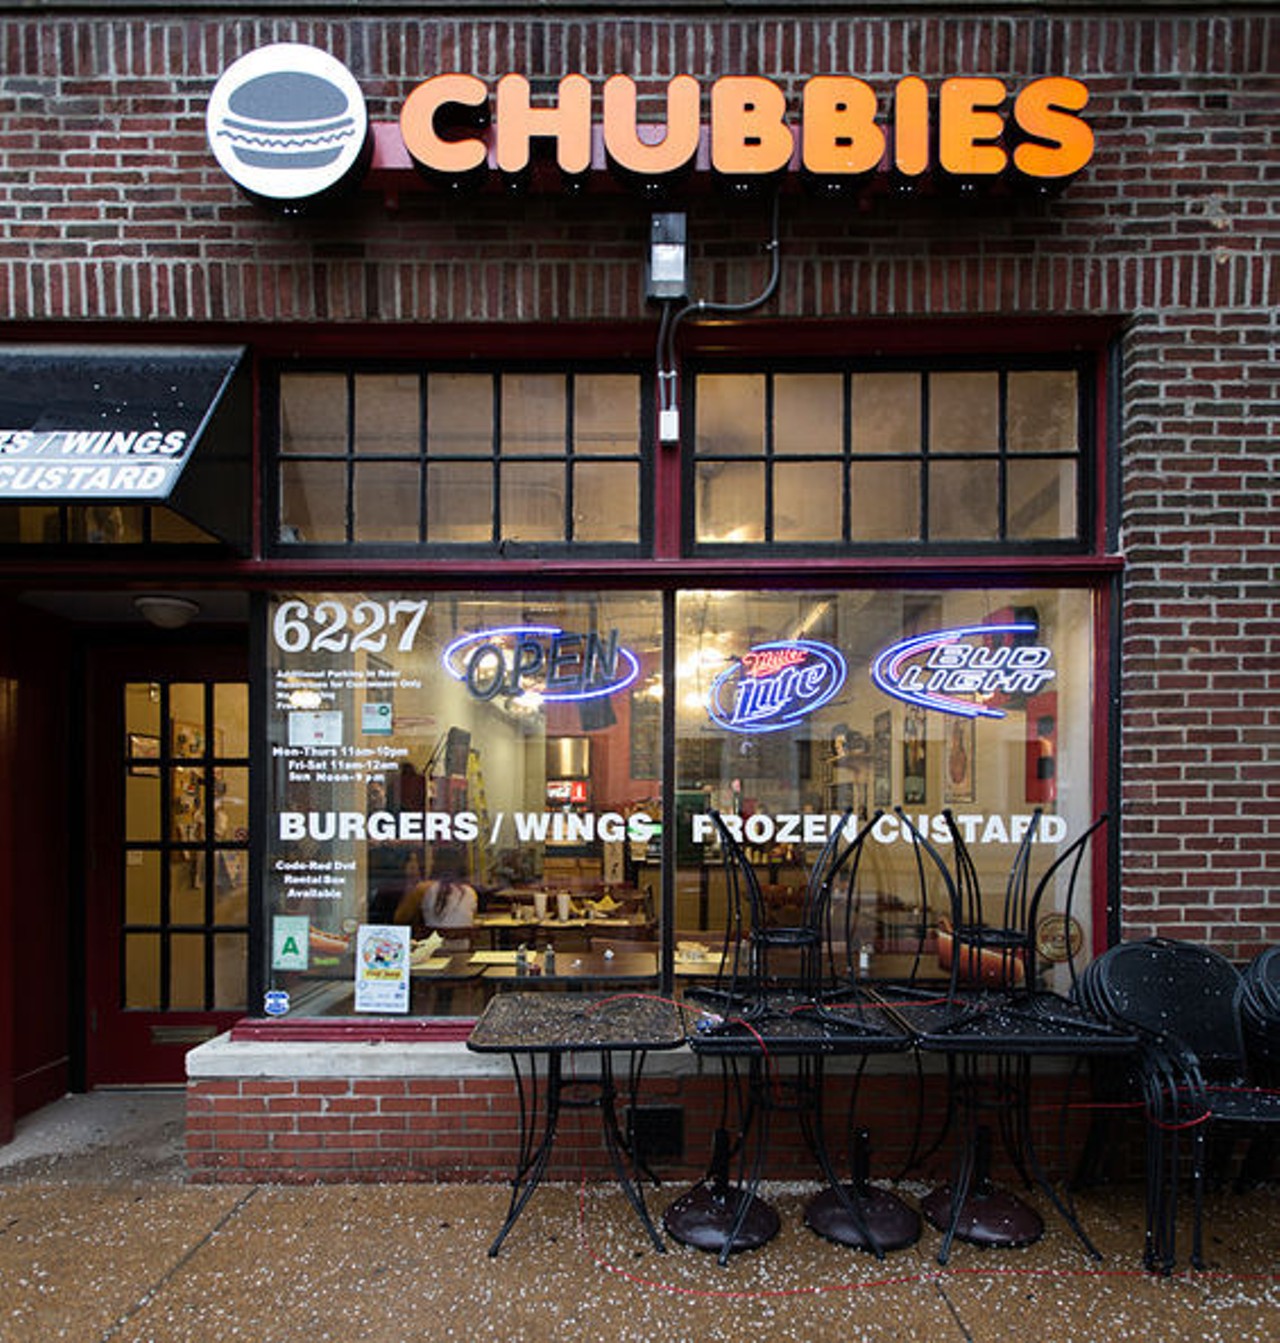 Chubbies
Chubbie's facade, 6227 Delmar Boulevard. "Just read the words printed across the windows: 'burgers, wings, frozen custard,' and envision the hordes of hungry students walking back from campus to their new Wash. U. digs." -- Ian Froeb